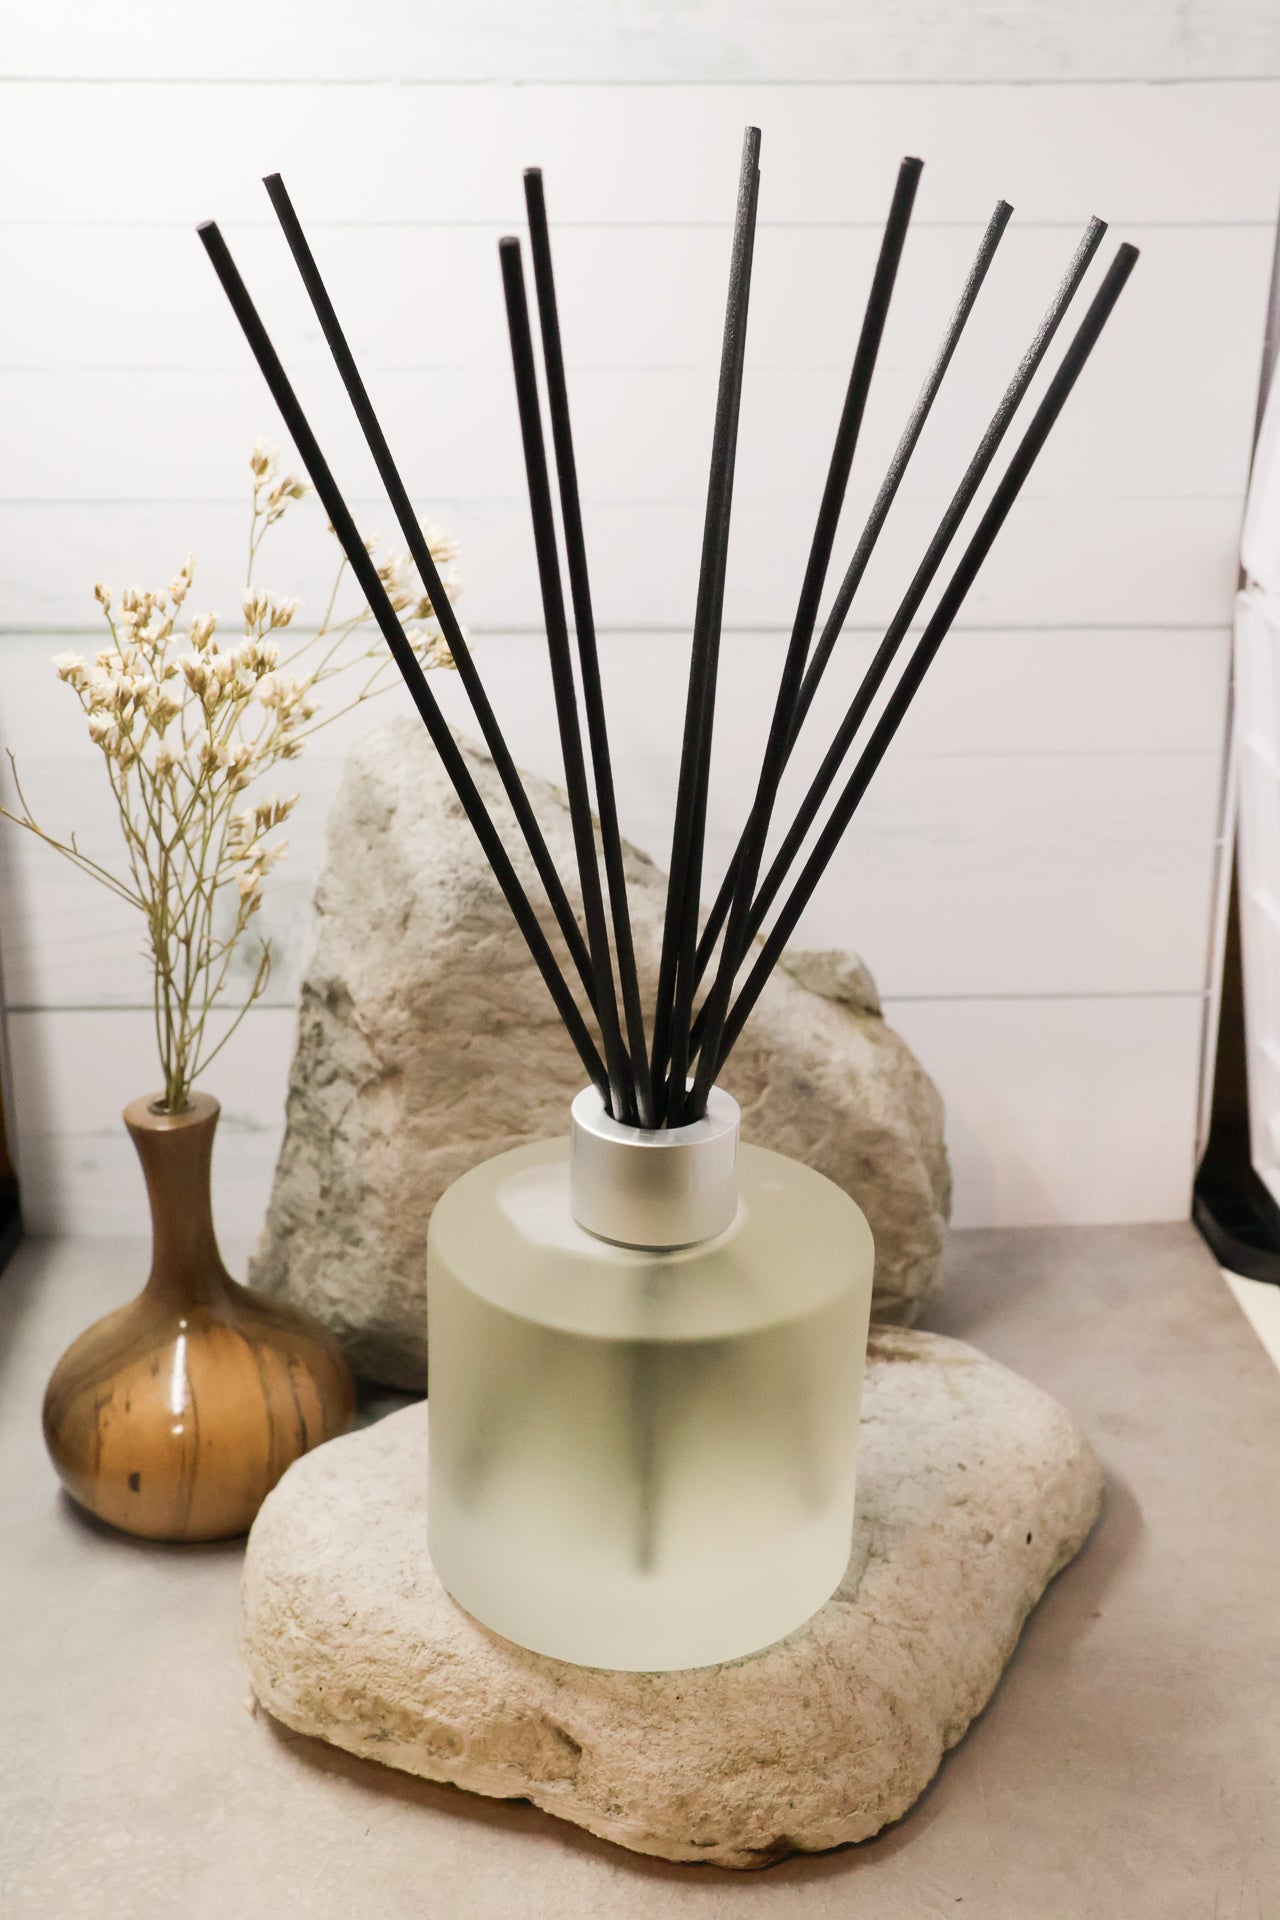 Crystal infused diffuser with wicks with the fragrance Ylang Ylang and Lavender